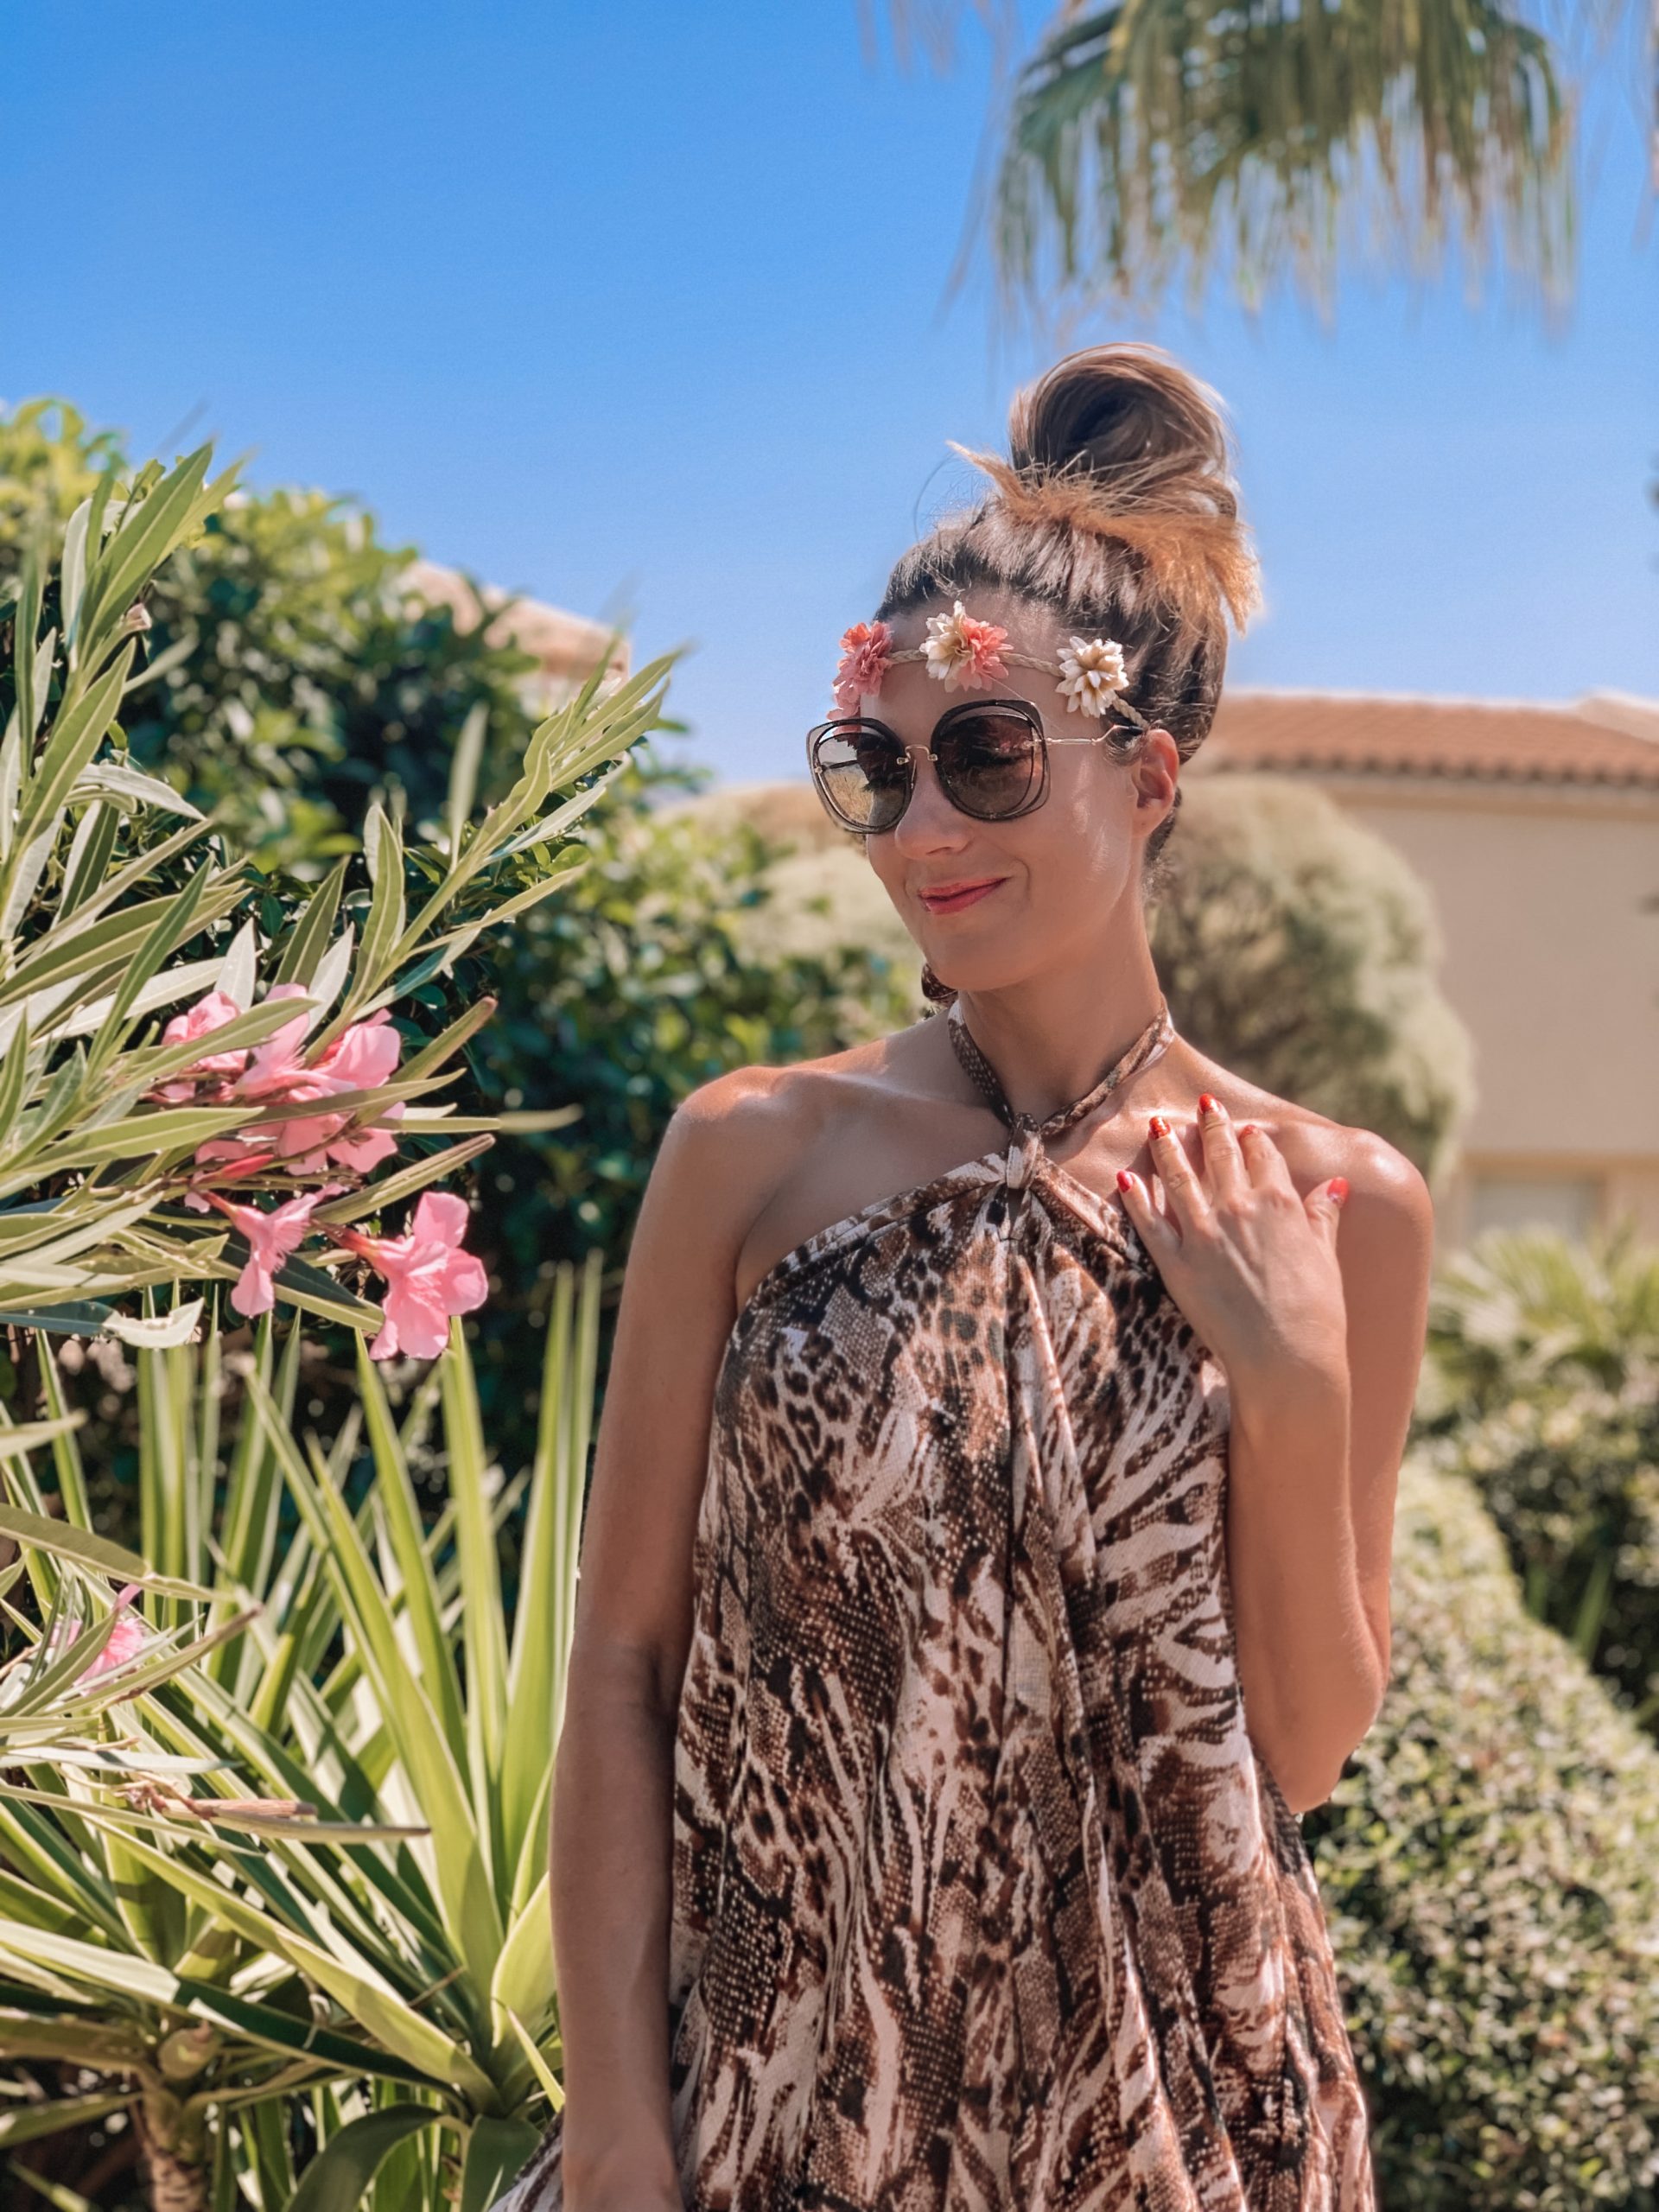 Summer holiday outfit ideas | playsuits | straw bags | quirky cut outs | tropical prints | ruffles